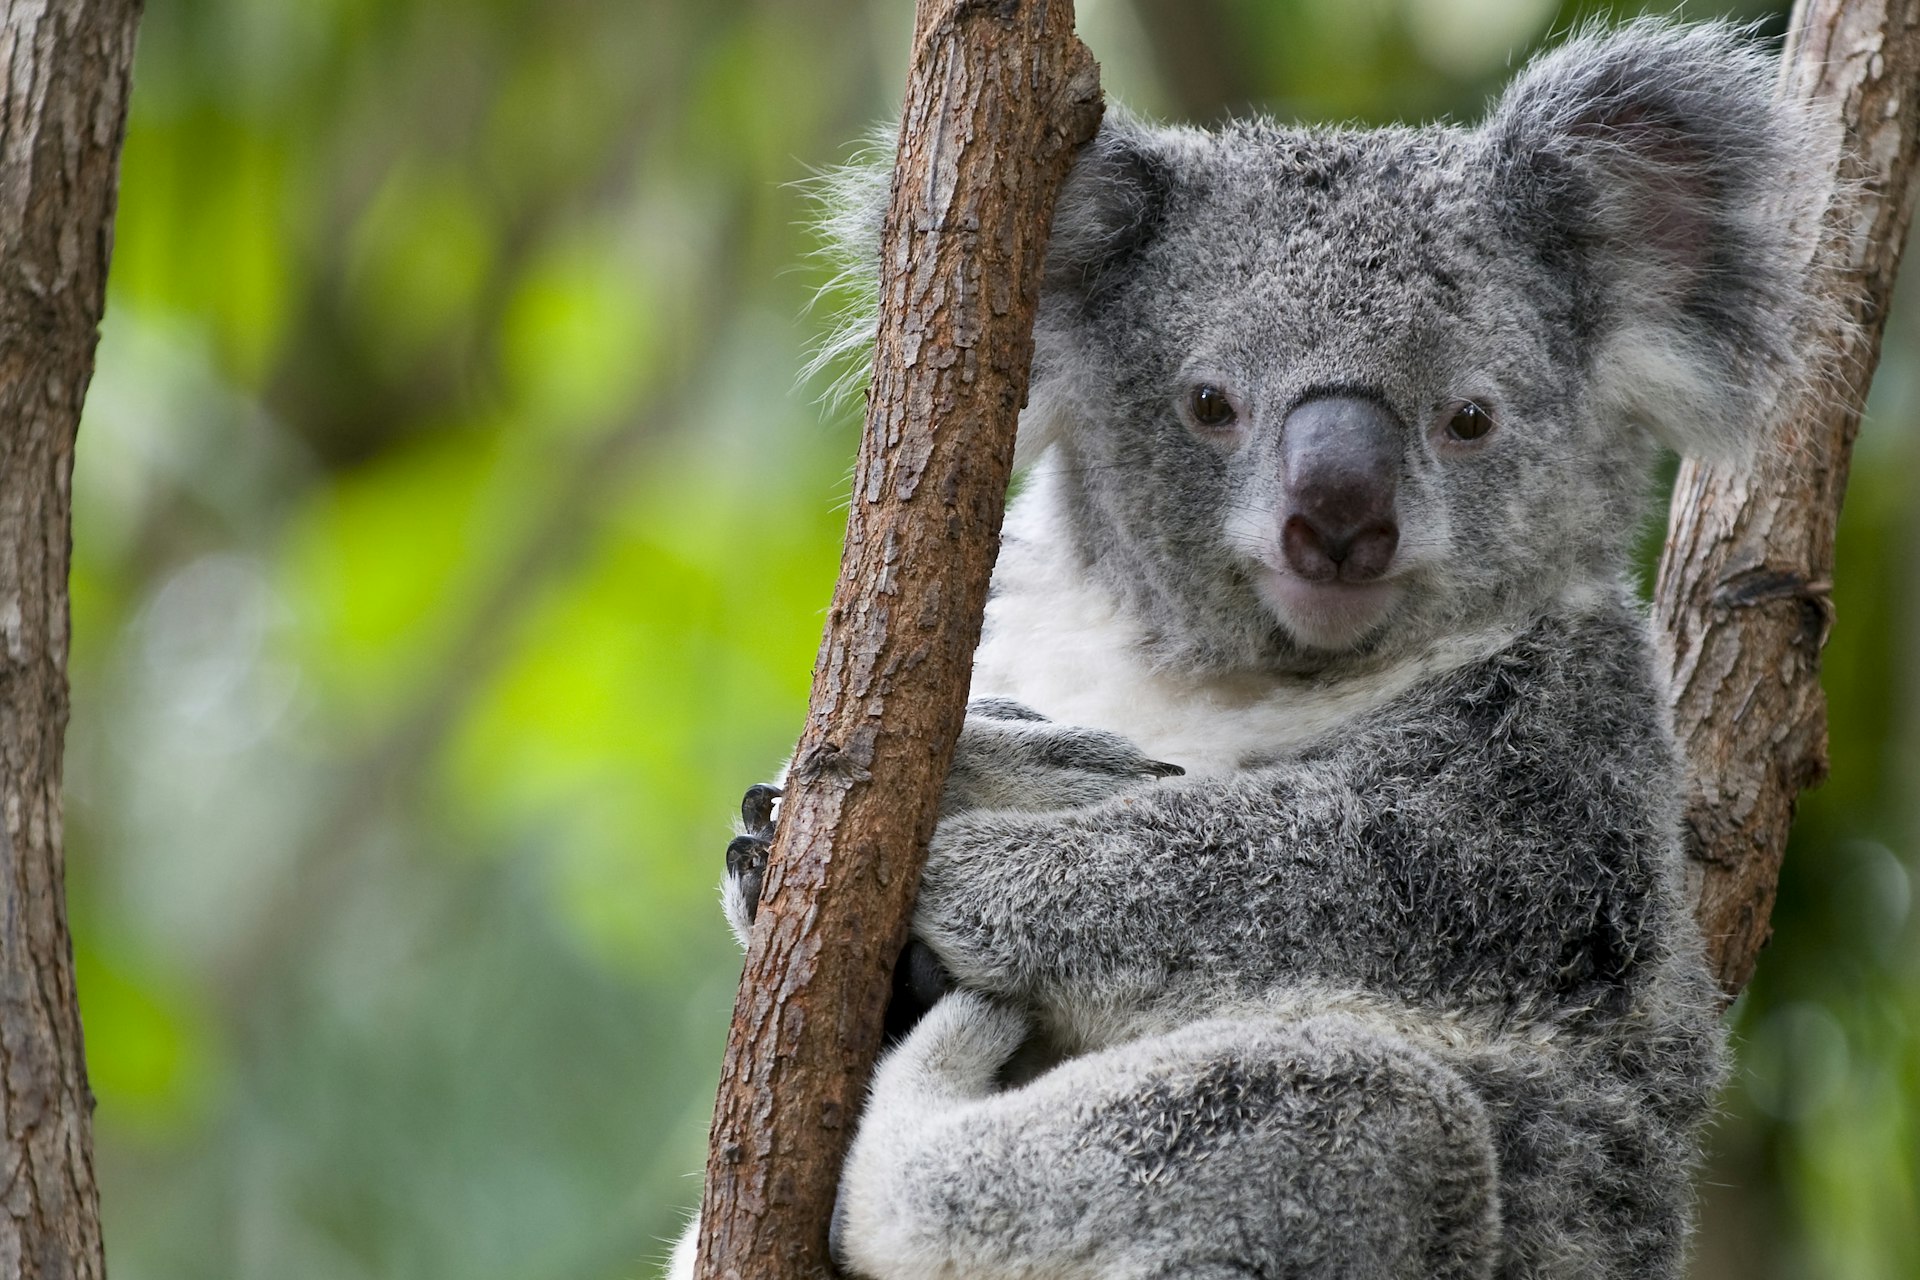 A koala, a small grey-brown bear-like creature, resting in trees